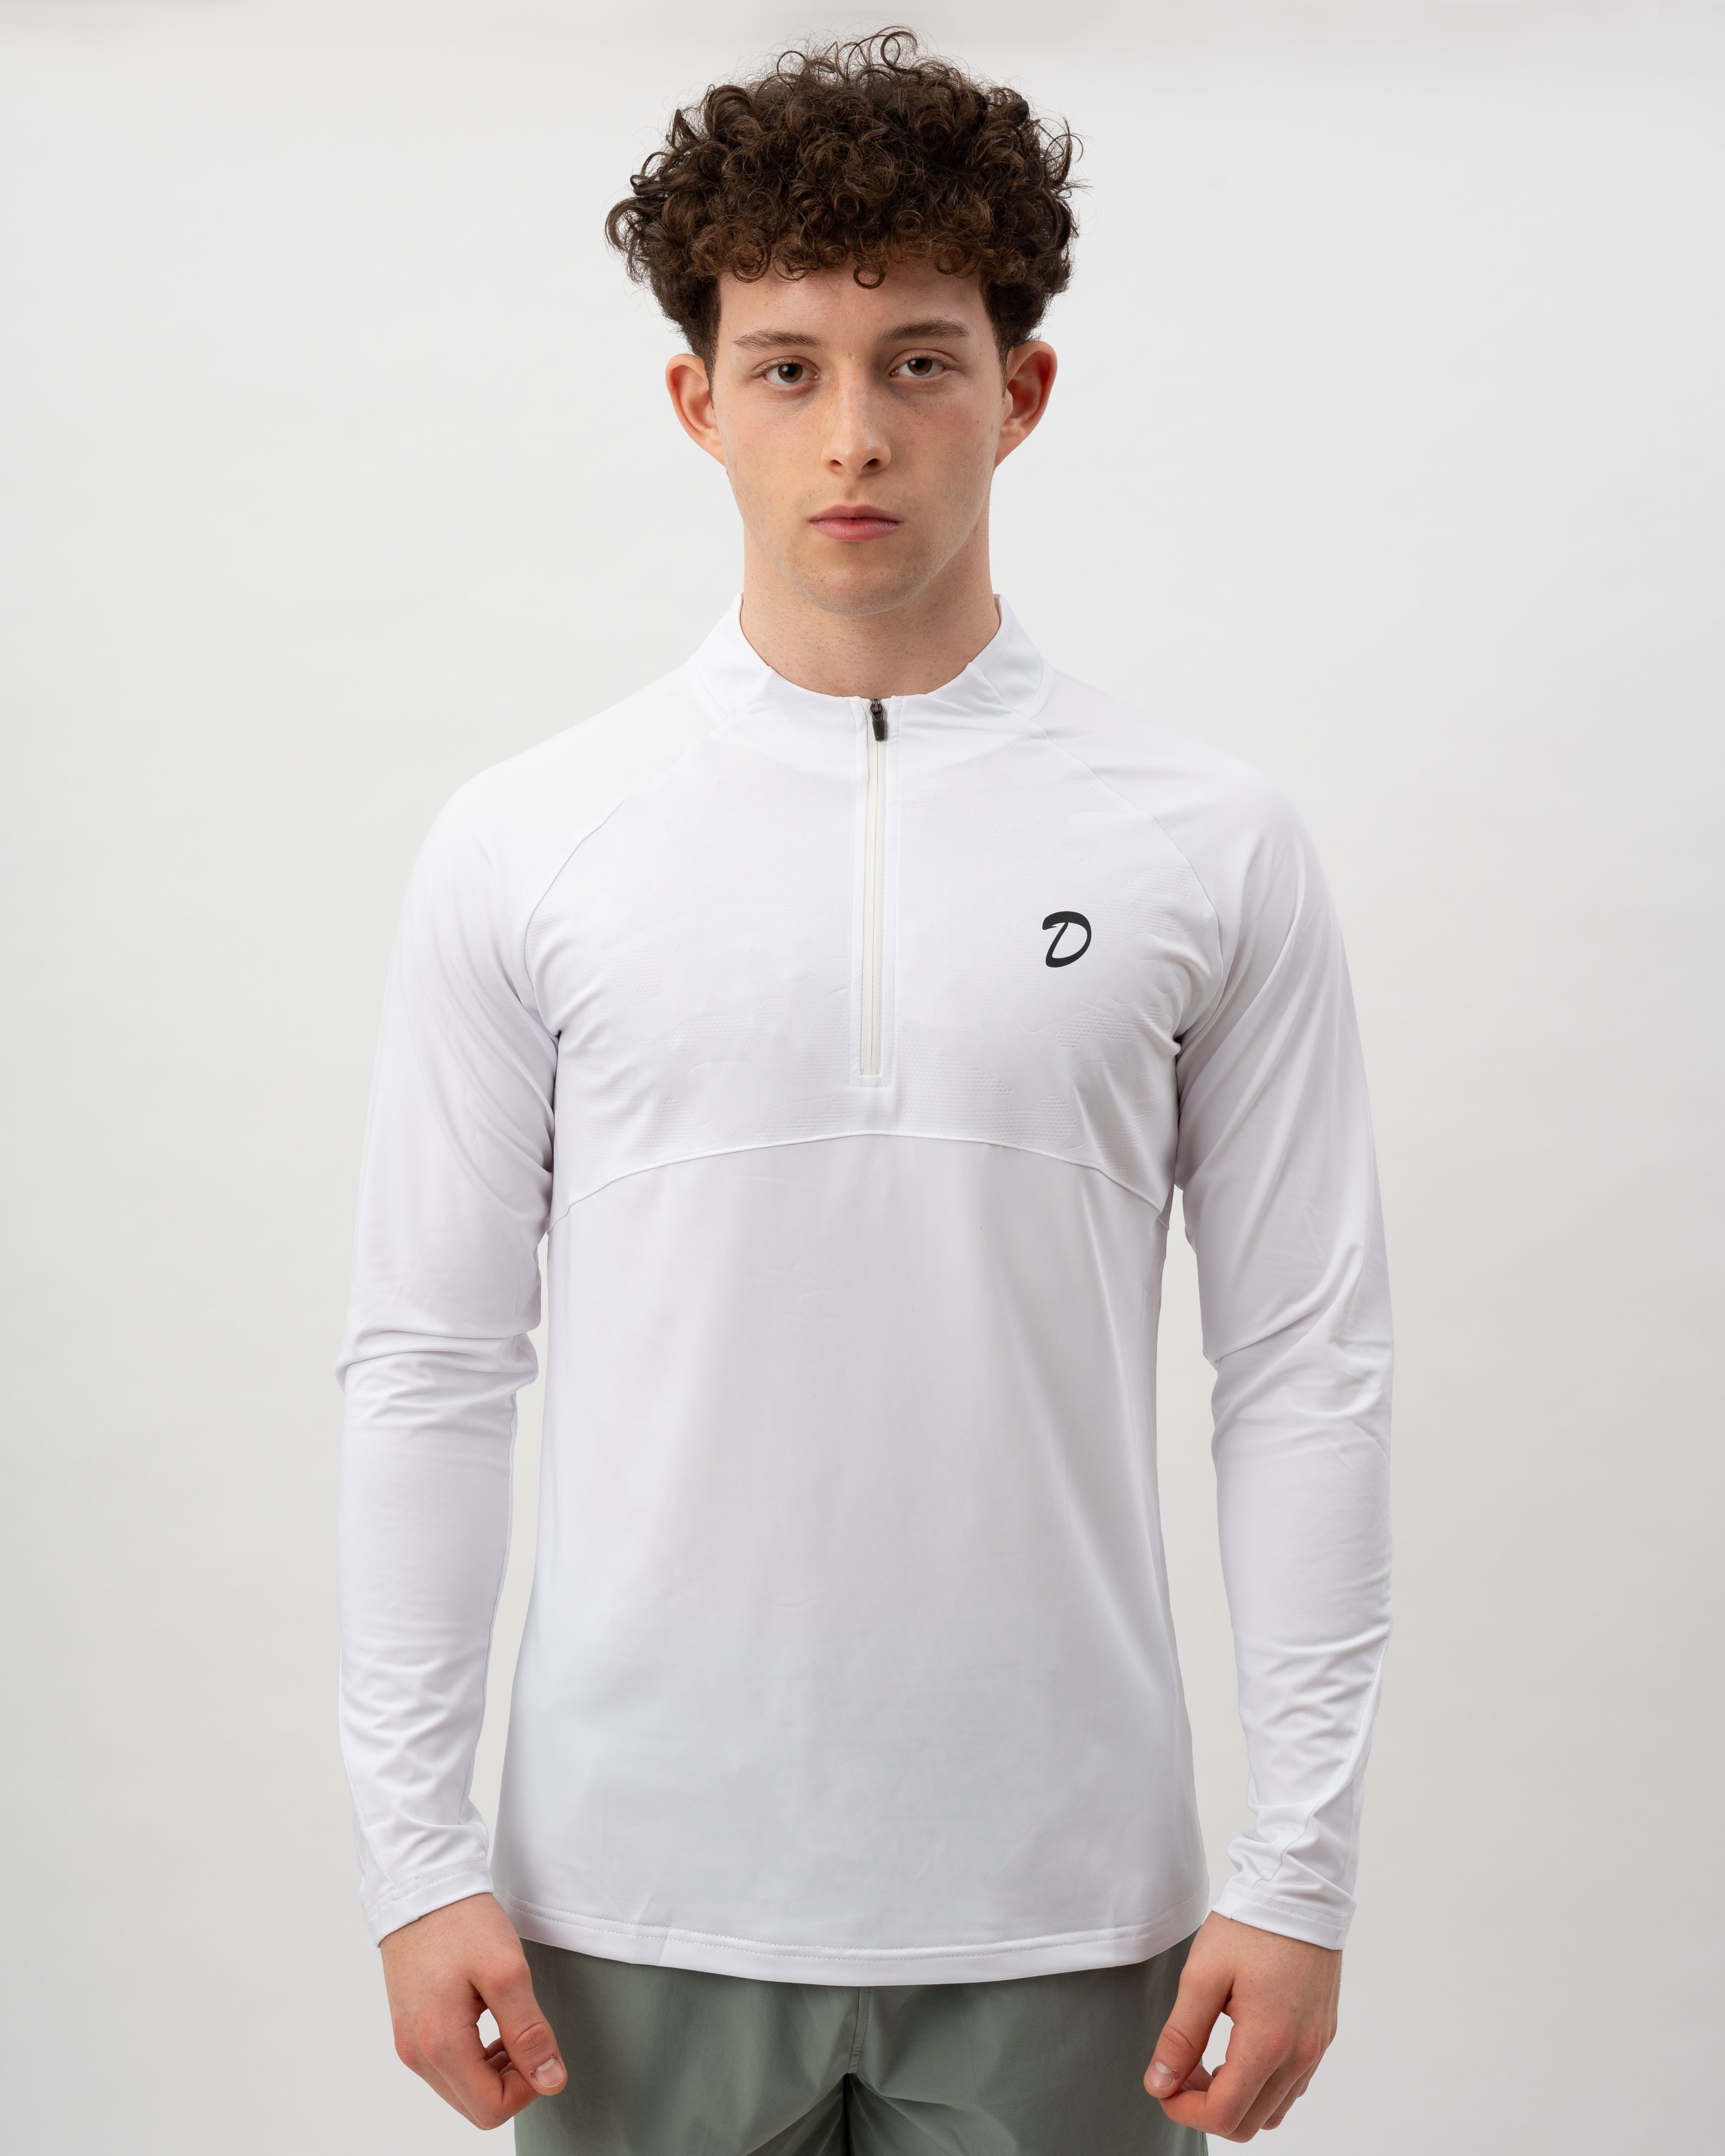 Ultra White - 1/4 Zip Up Top